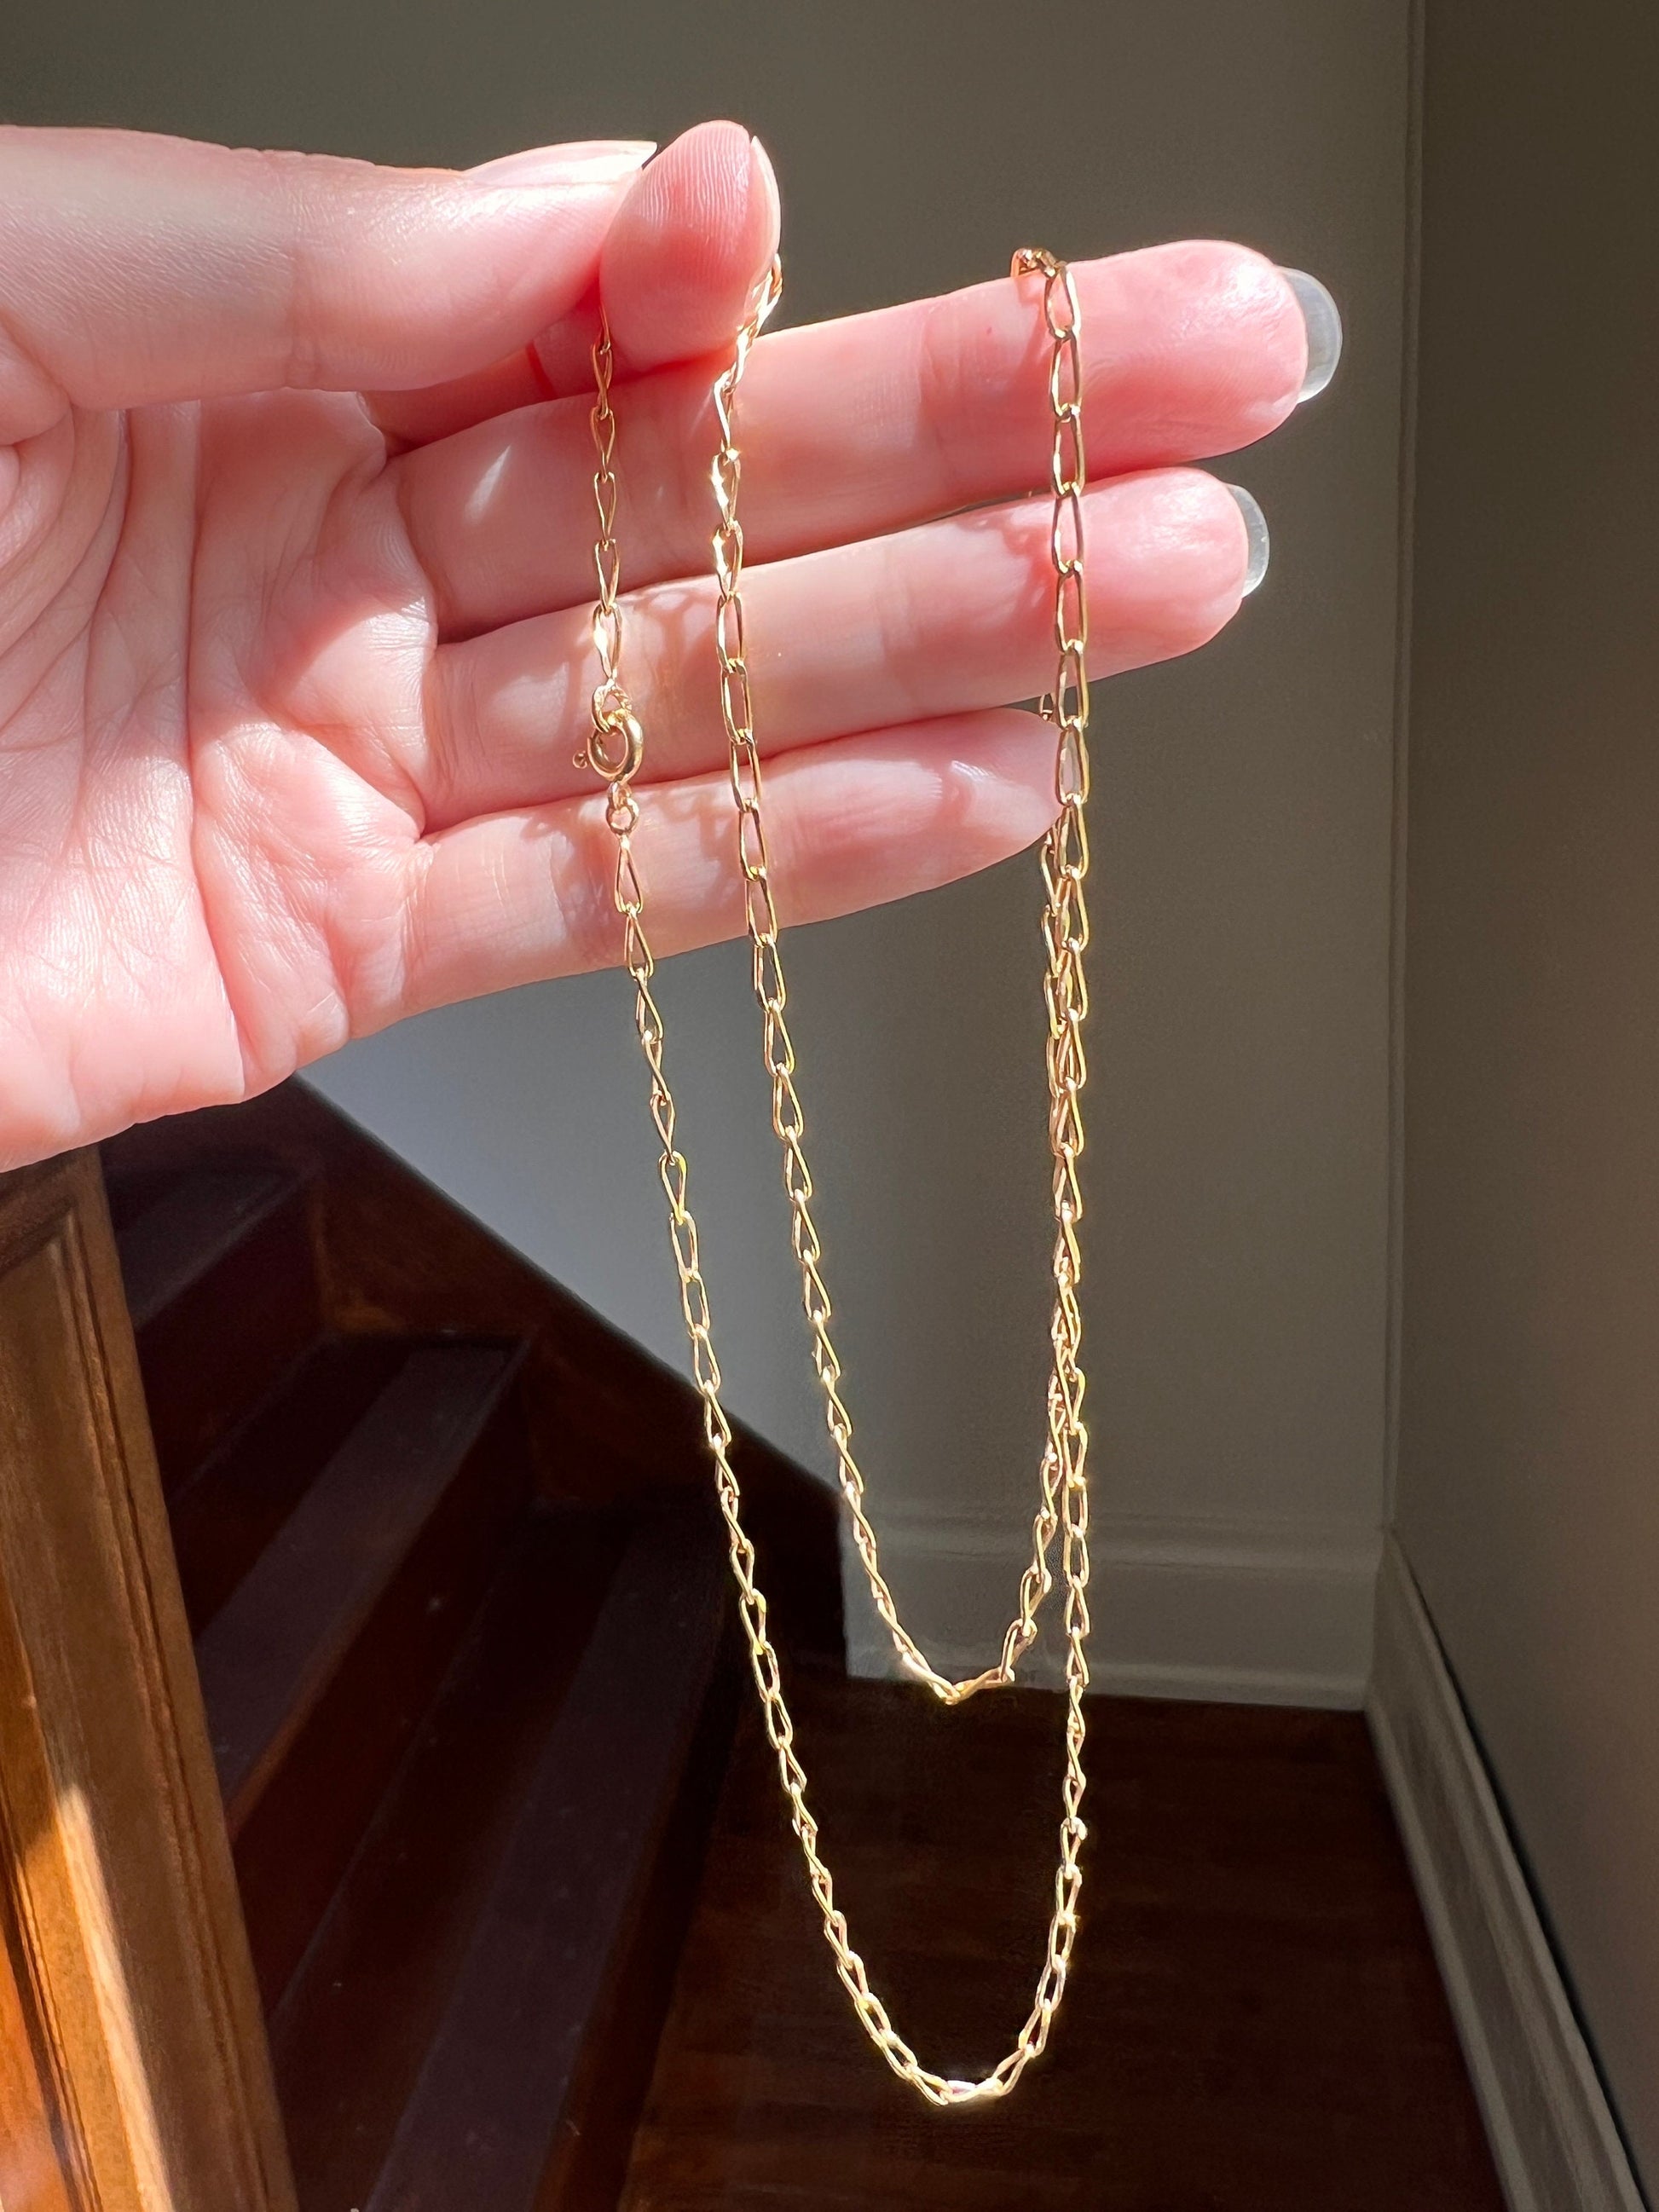 LONG French Sturdy Shimmering Vintage CURB Link Chain 6.5g 18k GOLD Solid Necklace 23.5" Neckmess Neckstack Retro Layering Romantic Gift Vtg